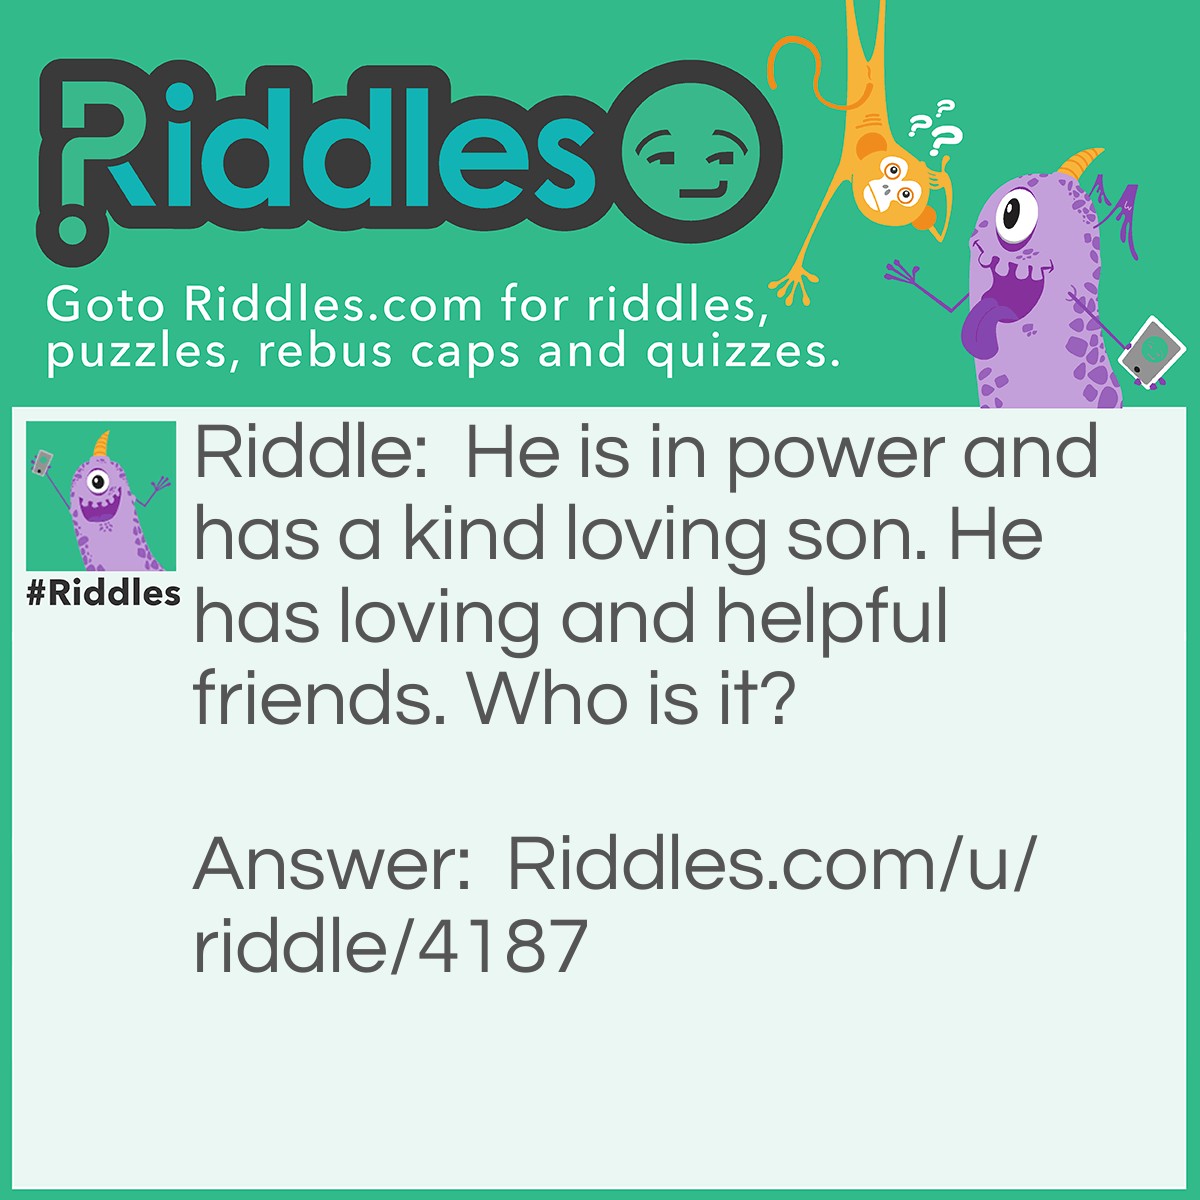 Riddle: He is in power and has a kind loving son. He has loving and helpful friends. Who is it? Answer: Jehovah.